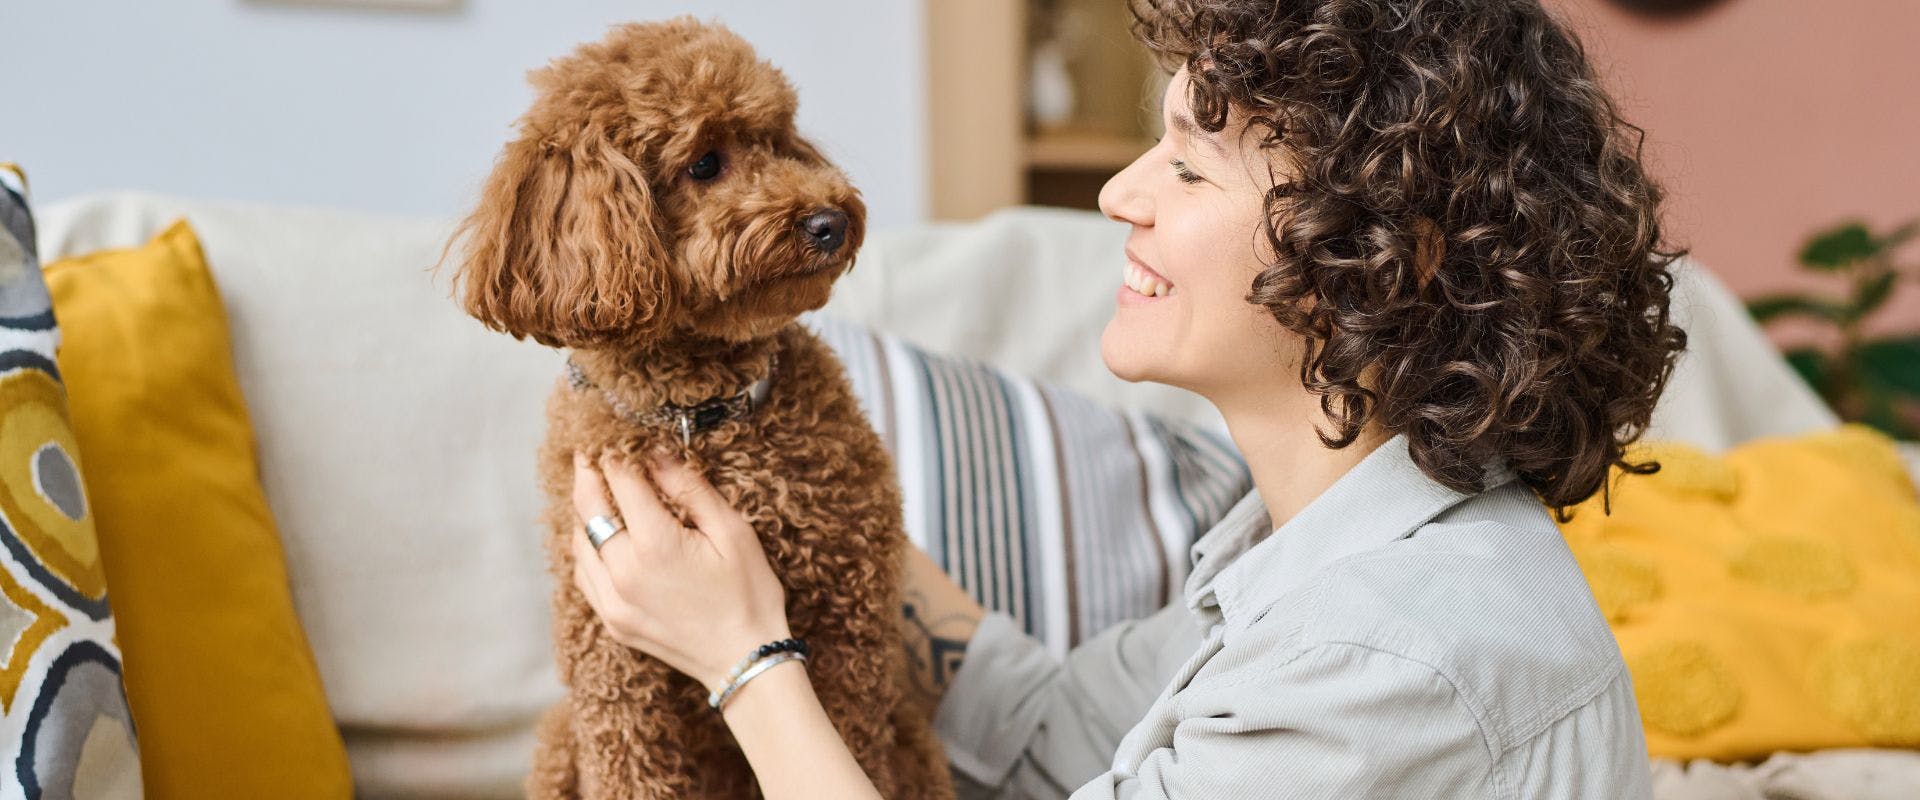 Woman cuddling a small Doodle dog who is sitting on a sofa